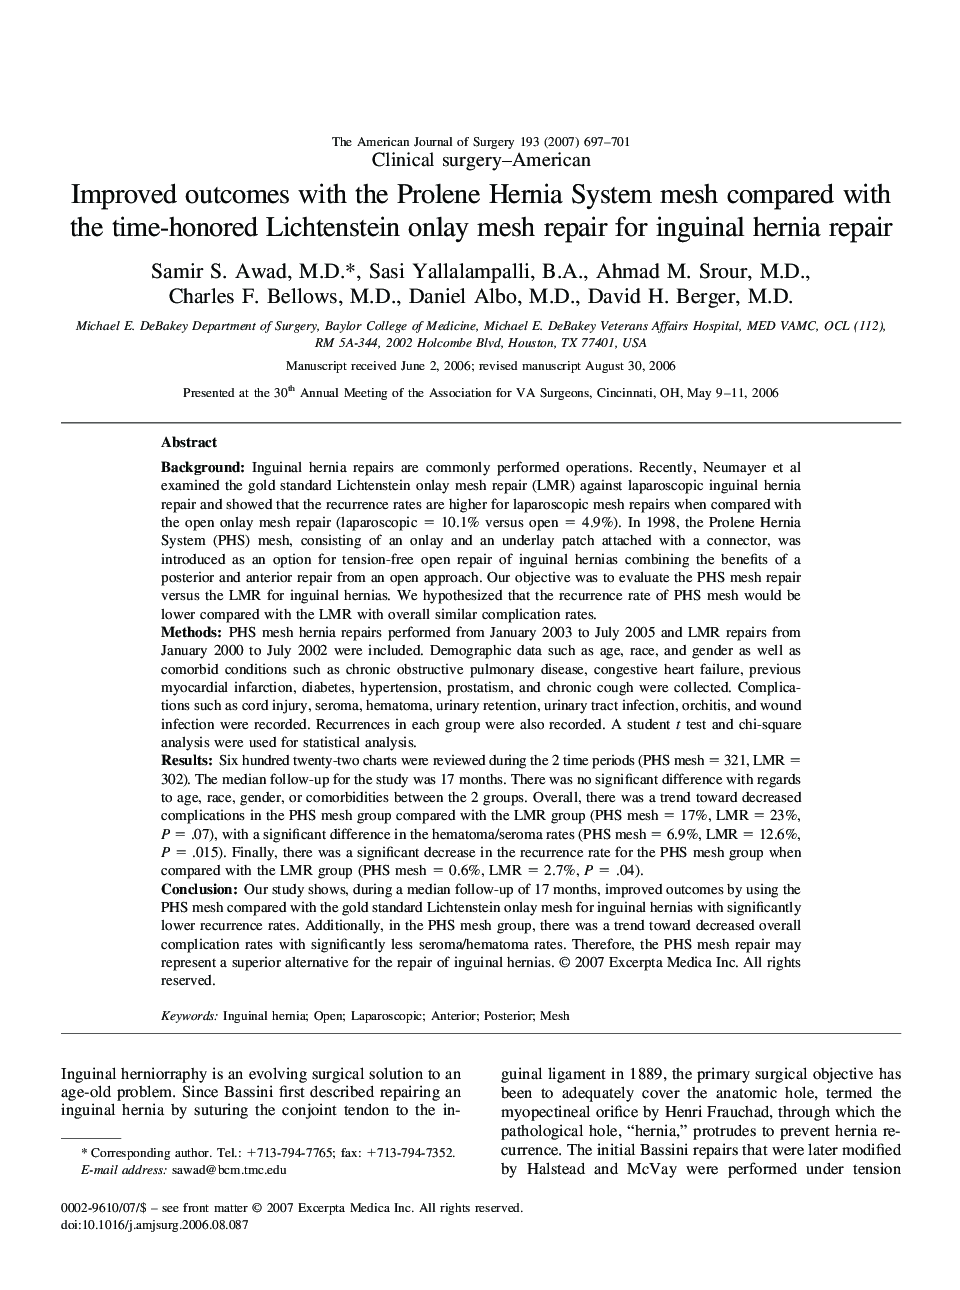 Improved outcomes with the Prolene Hernia System mesh compared with the time-honored Lichtenstein onlay mesh repair for inguinal hernia repair